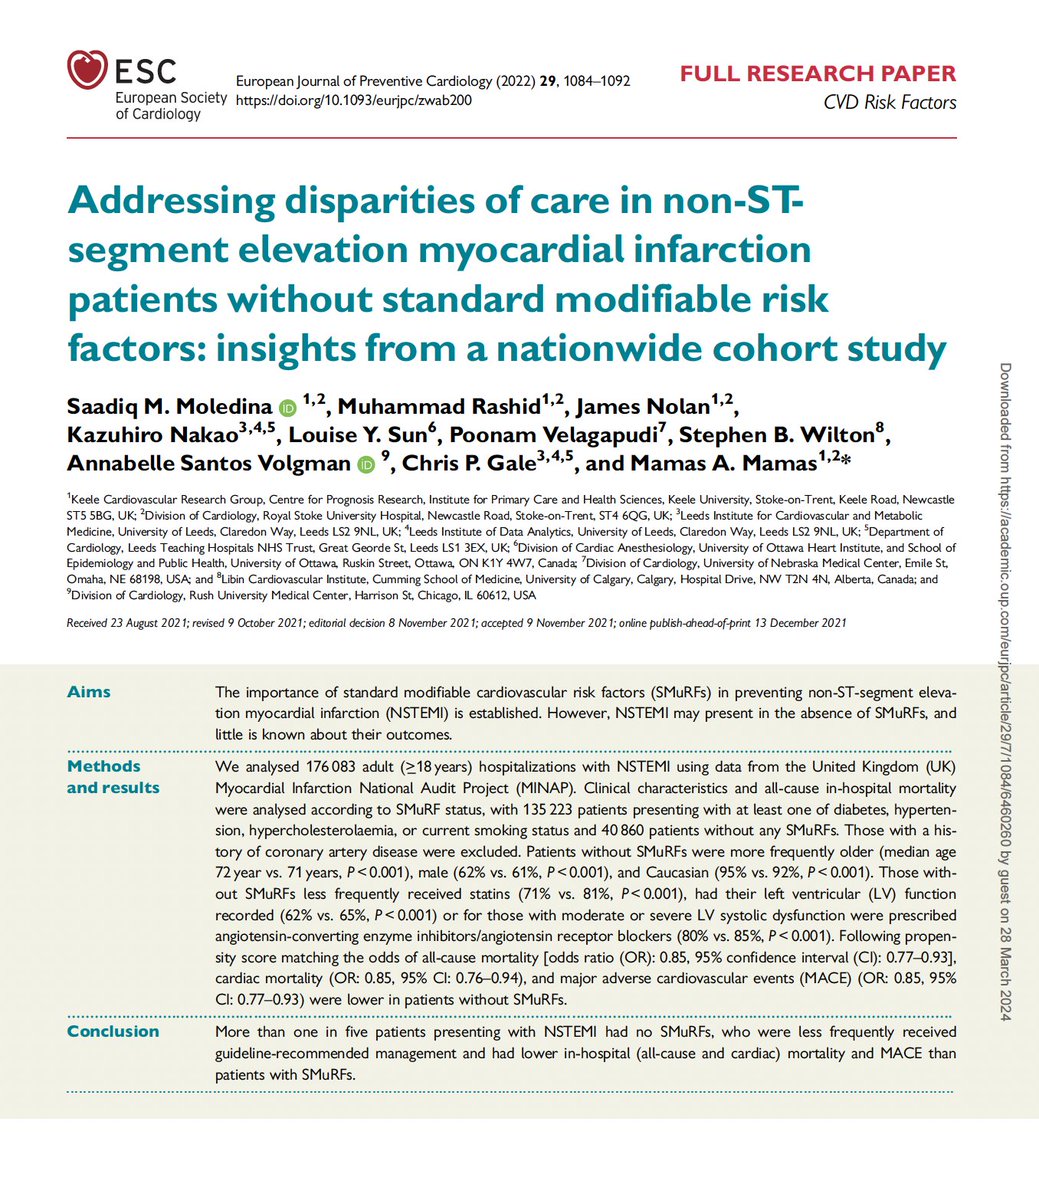 Congratulations to @MoledinaSM for the award of his PhD today 'Addressing disparities in the care of Non-ST-Elevation Myocardial Infarction (NSTEMI) patients' with the publication of several high quality manuscripts. Its one of the best part of the job to see group members…